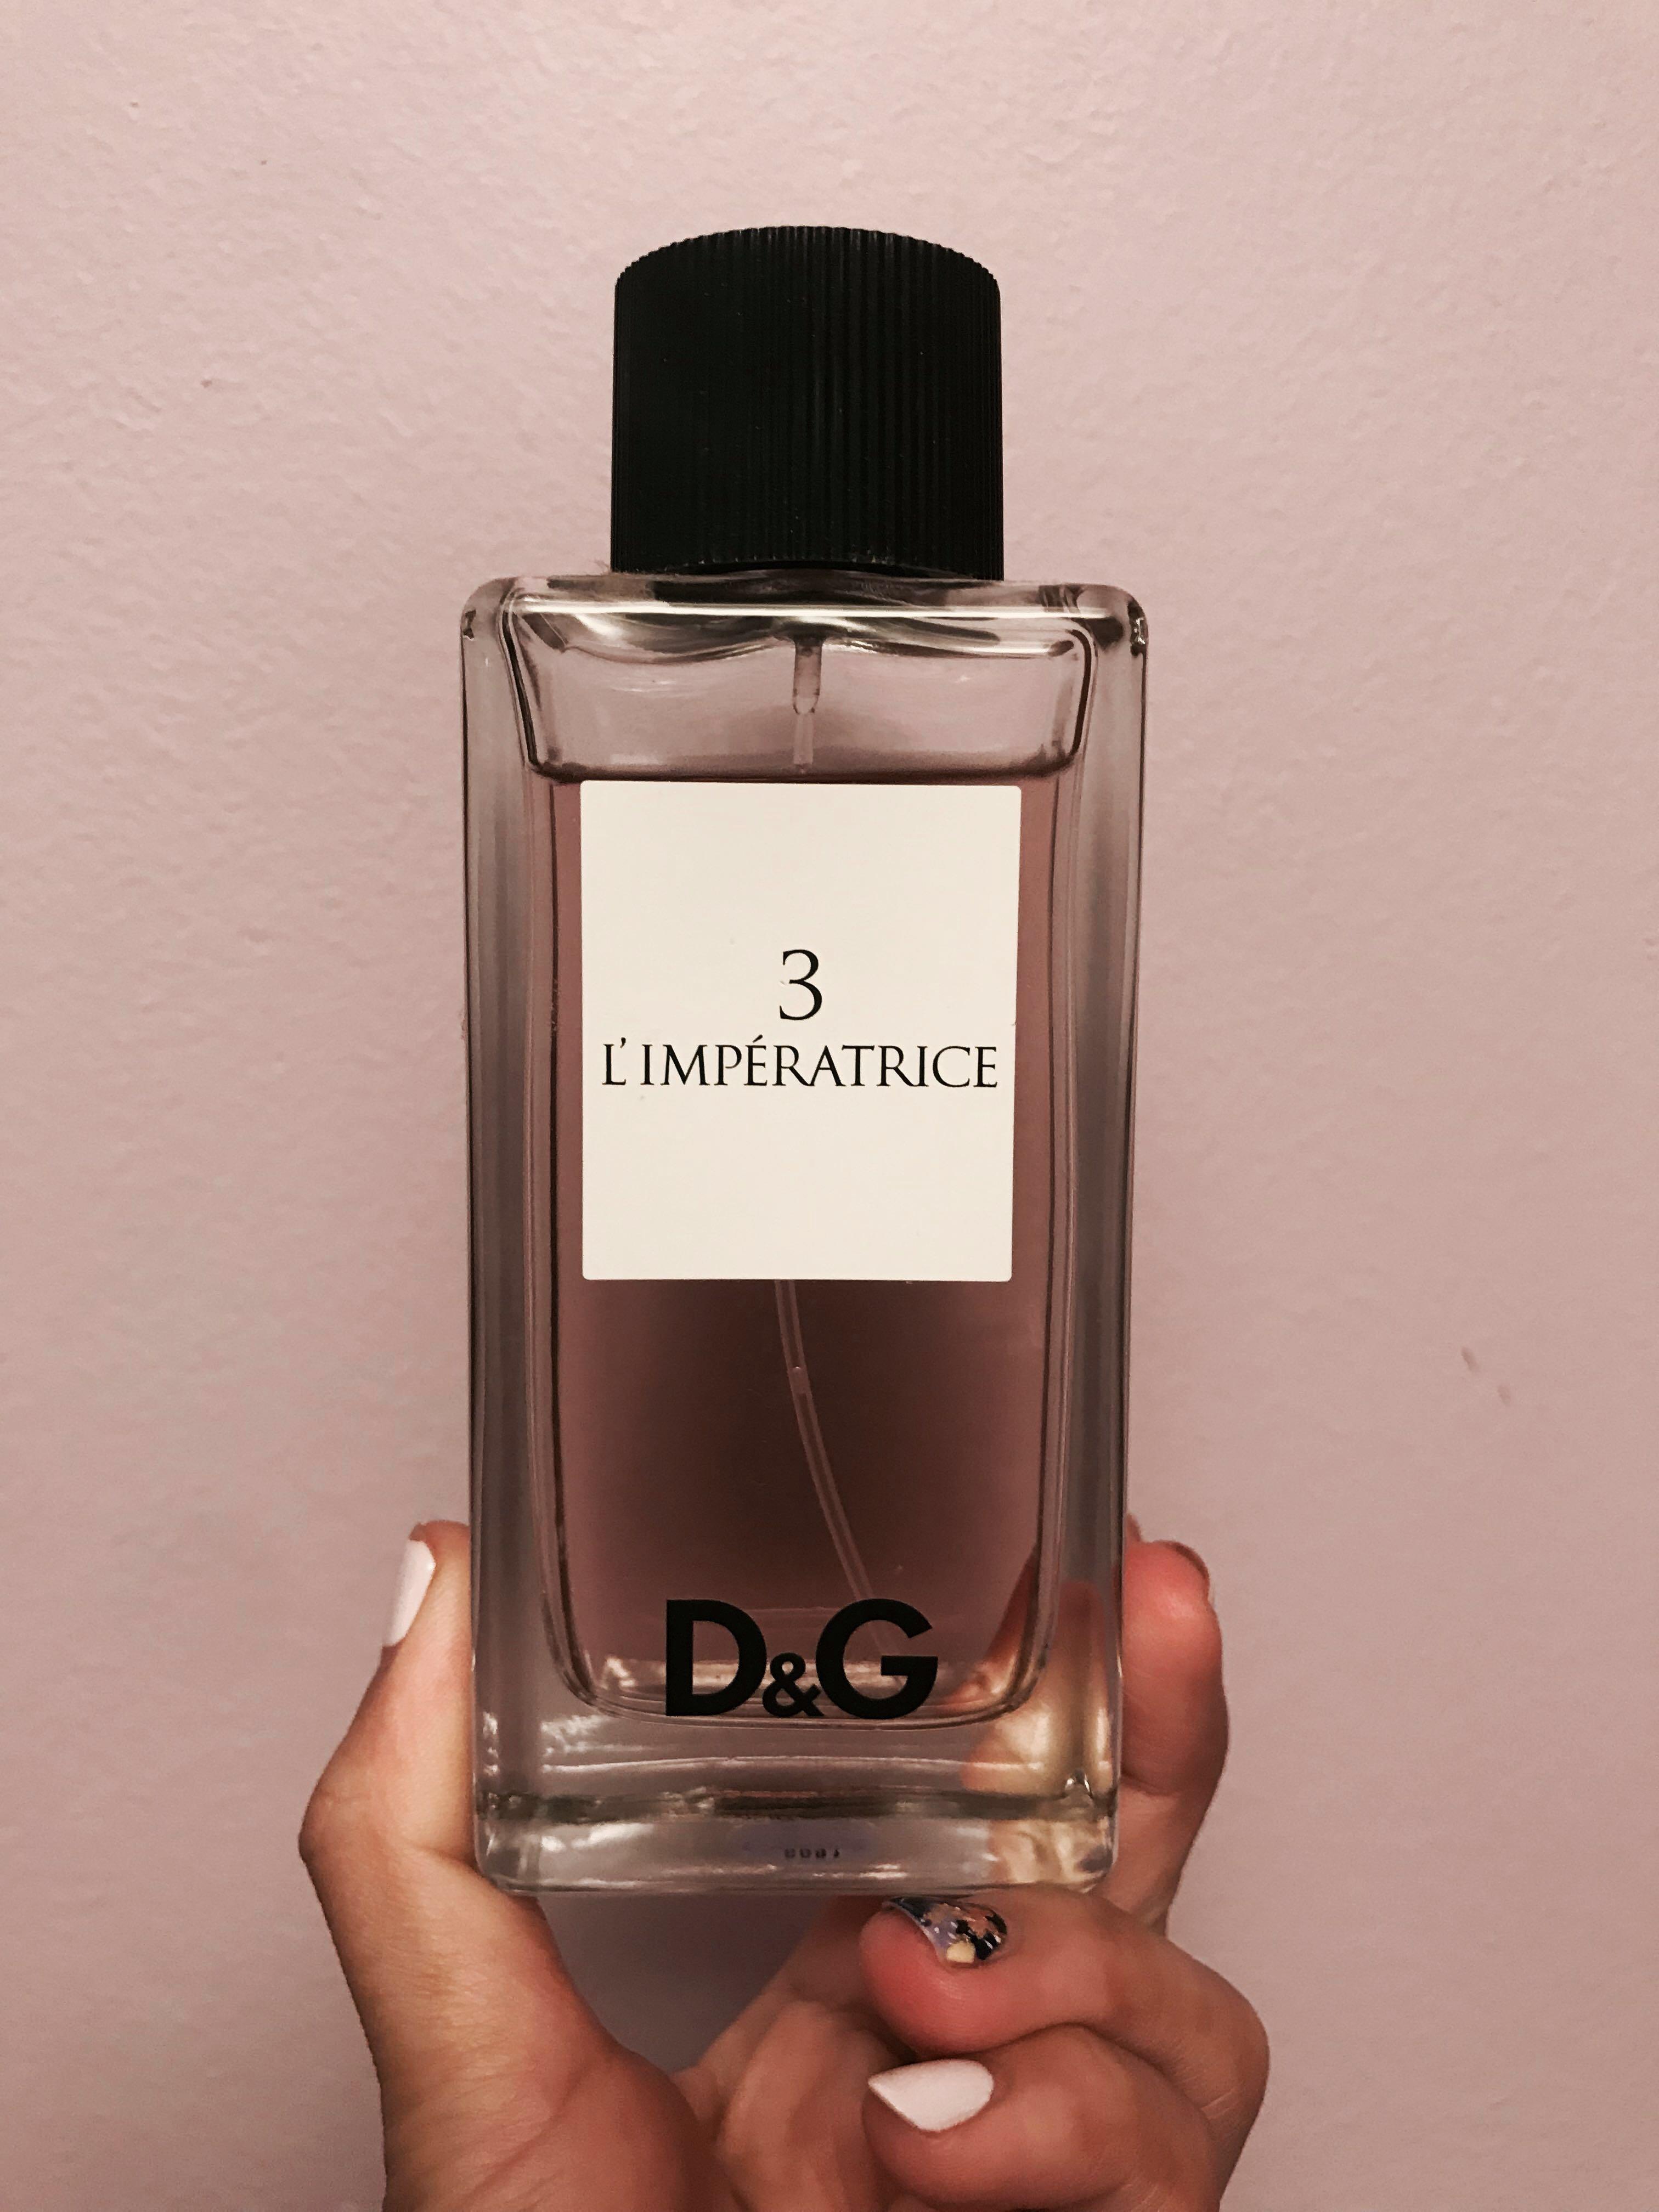 dolce and gabbana imperatrice